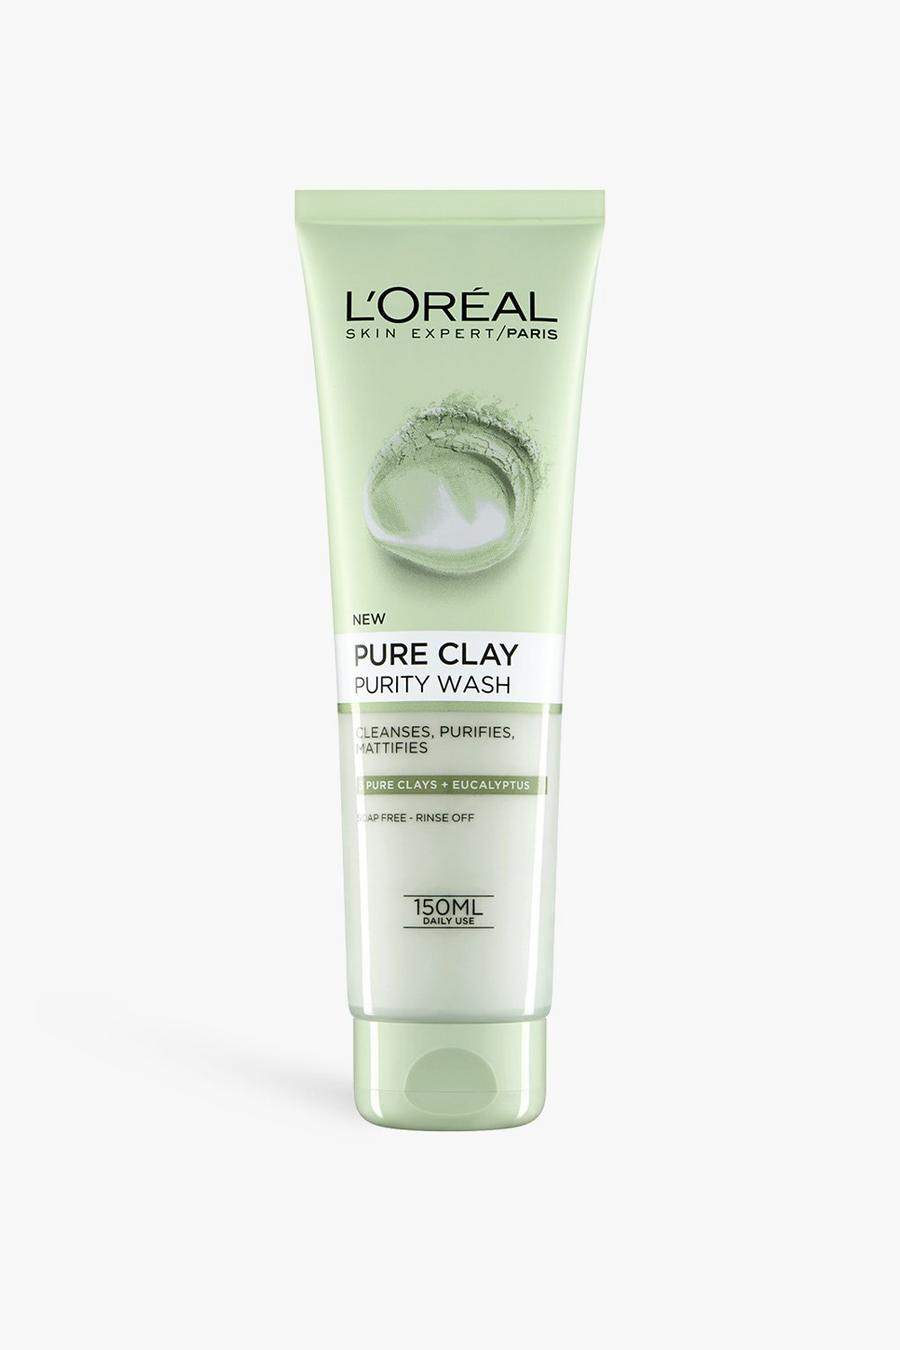 L'Oreal Paris Detergente viso purificante all'eucalipto, Clear image number 1